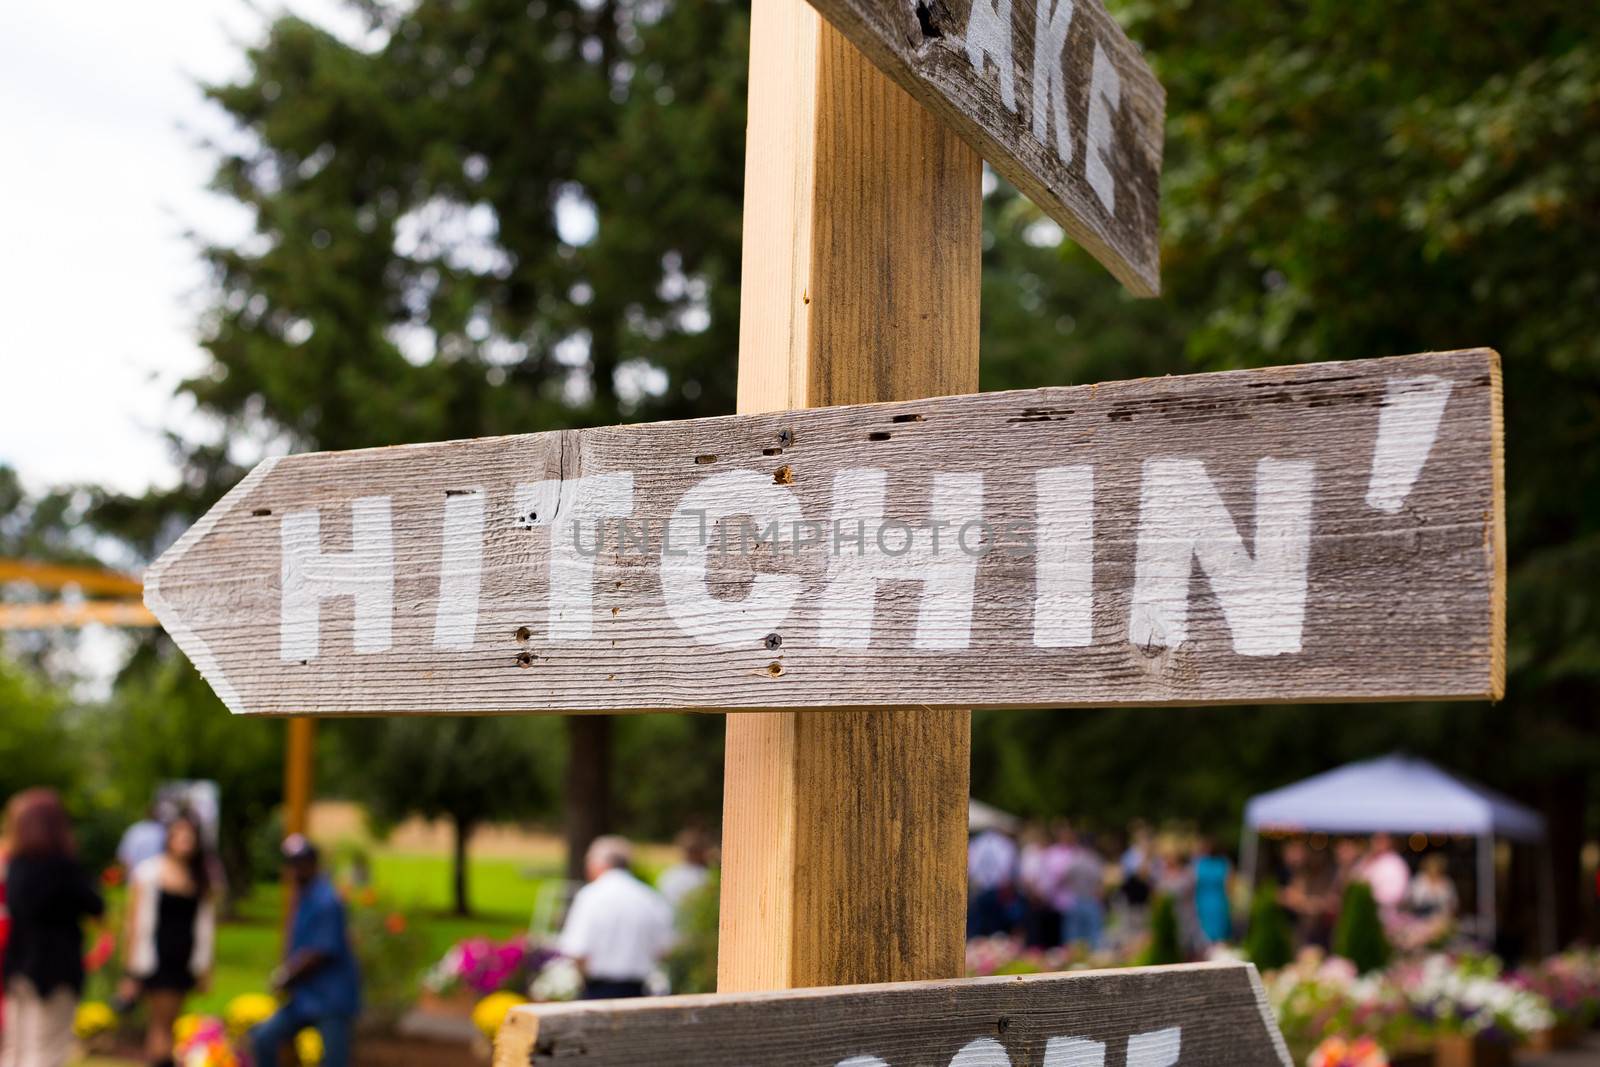 A handmade sign reads hithcin at an outdoor summer wedding pointing guests to the ceremony location.